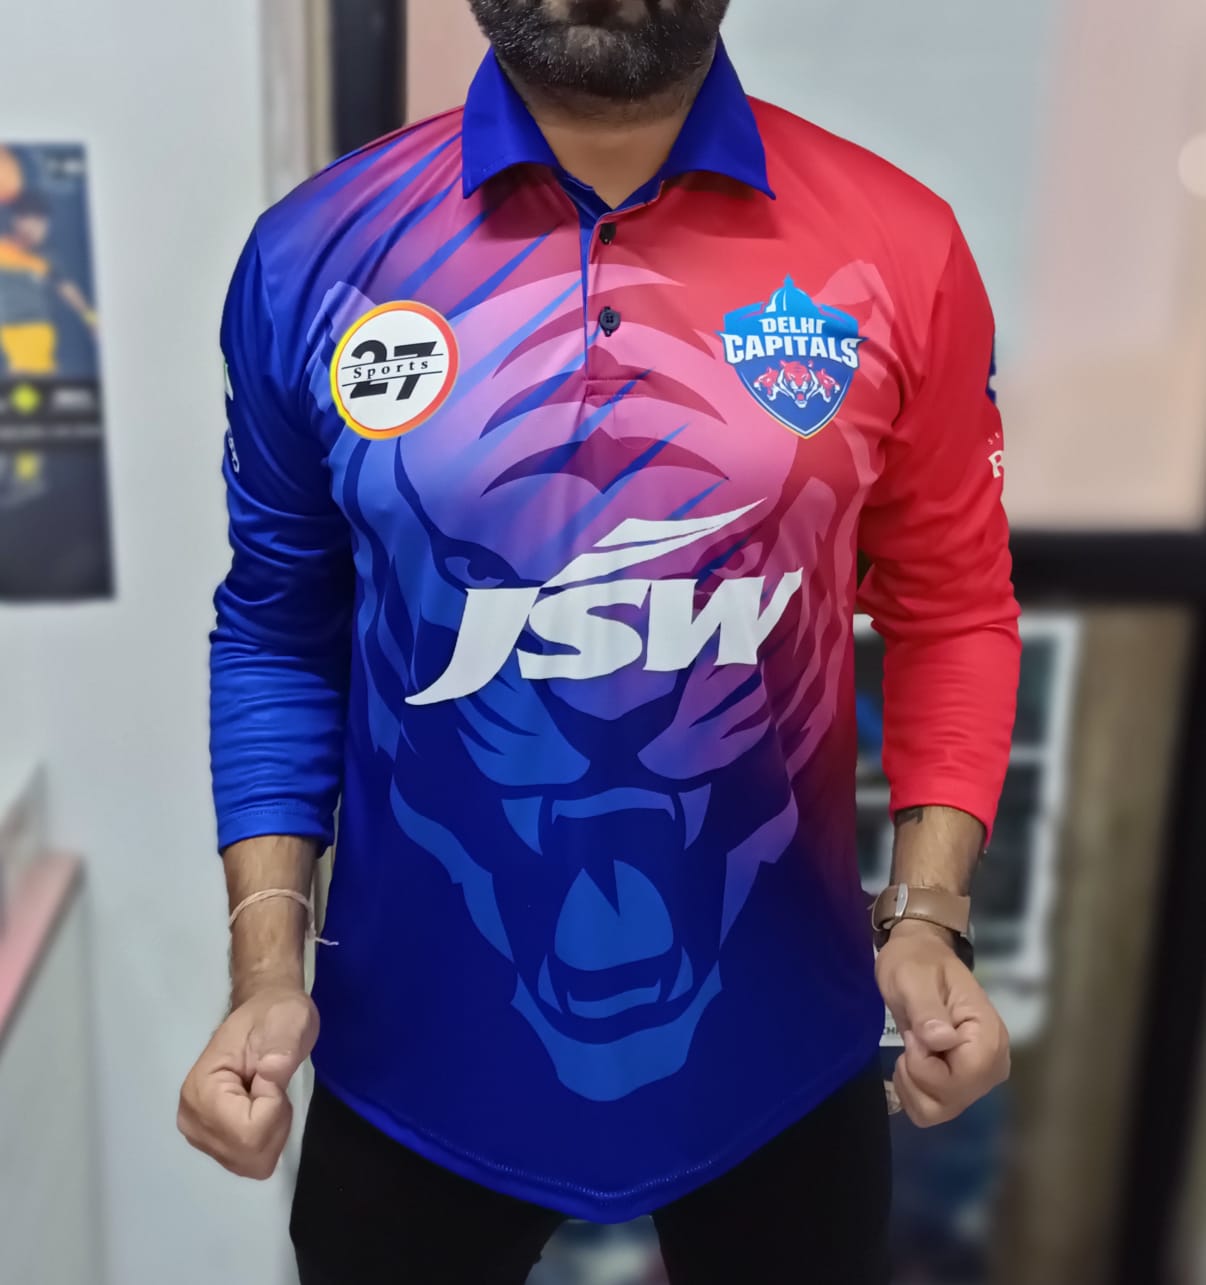  Whitedot Delhi Capitals IPL Replica Cricket Jersey 2022…  (X-Small - 36) Red, Blue : Clothing, Shoes & Jewelry